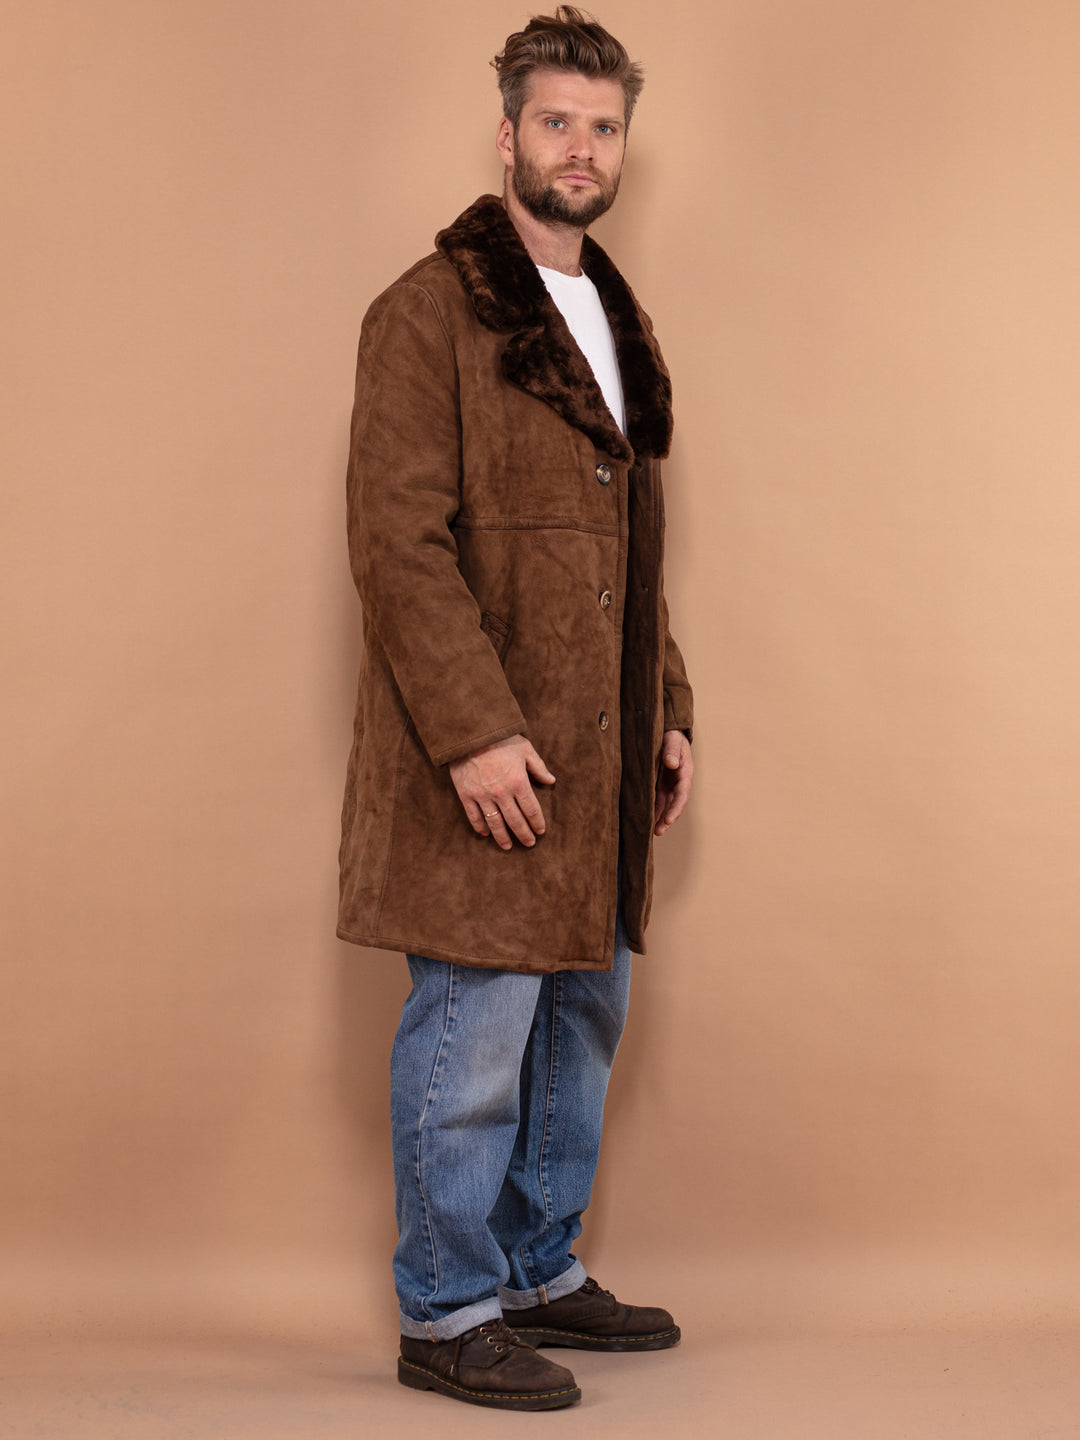 Men Shearling Coat 70's, Size Large Worn In Shearling Coat, Retro Leather Coat, Brown Suede Overcoat, Boho Winter Coat, Old Fashioned Coat